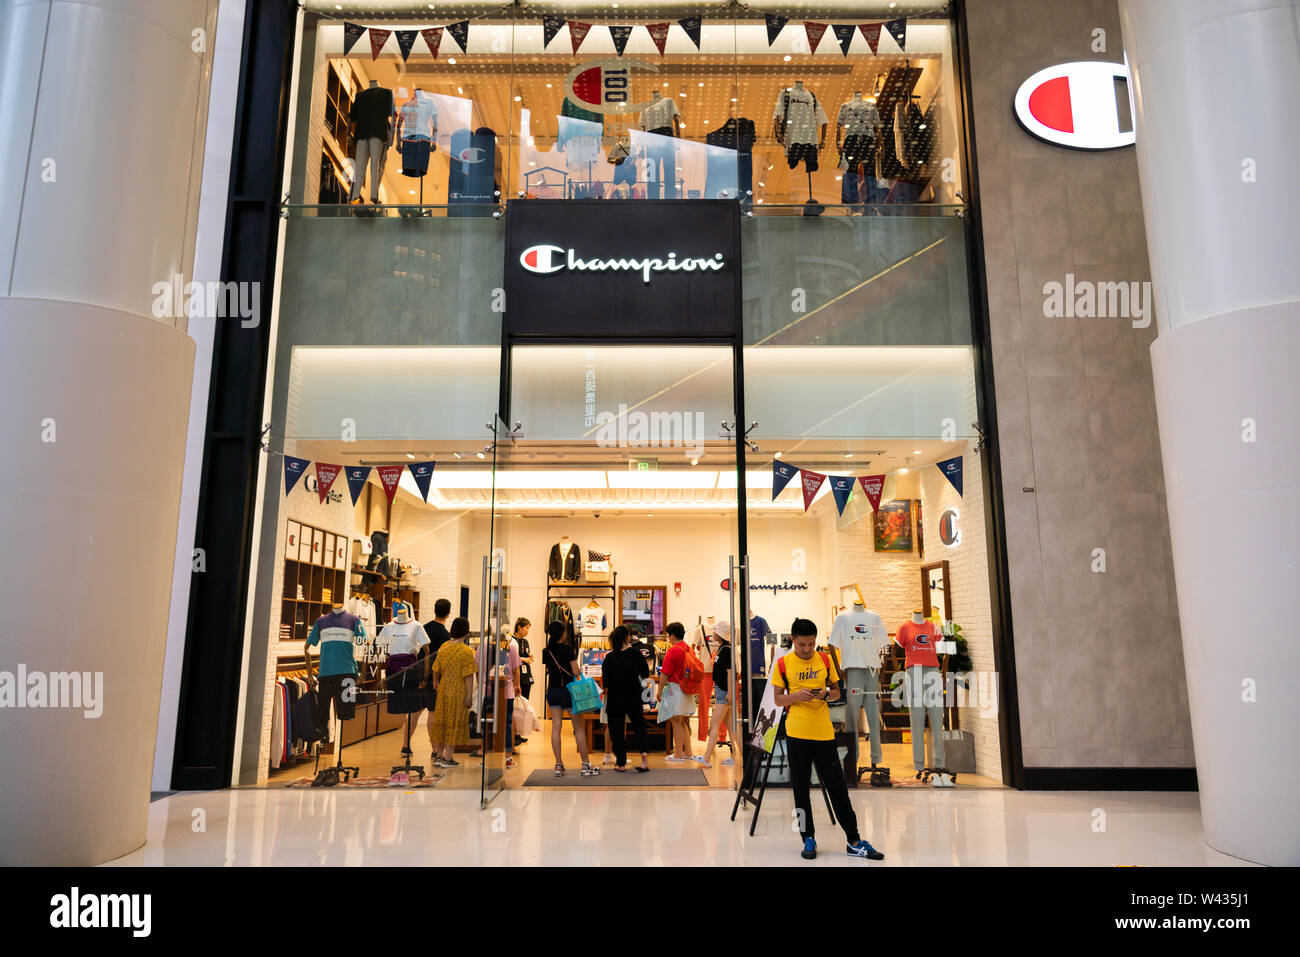 An American clothing manufacturer Champion store and logo seen in Shanghai  Stock Photo - Alamy